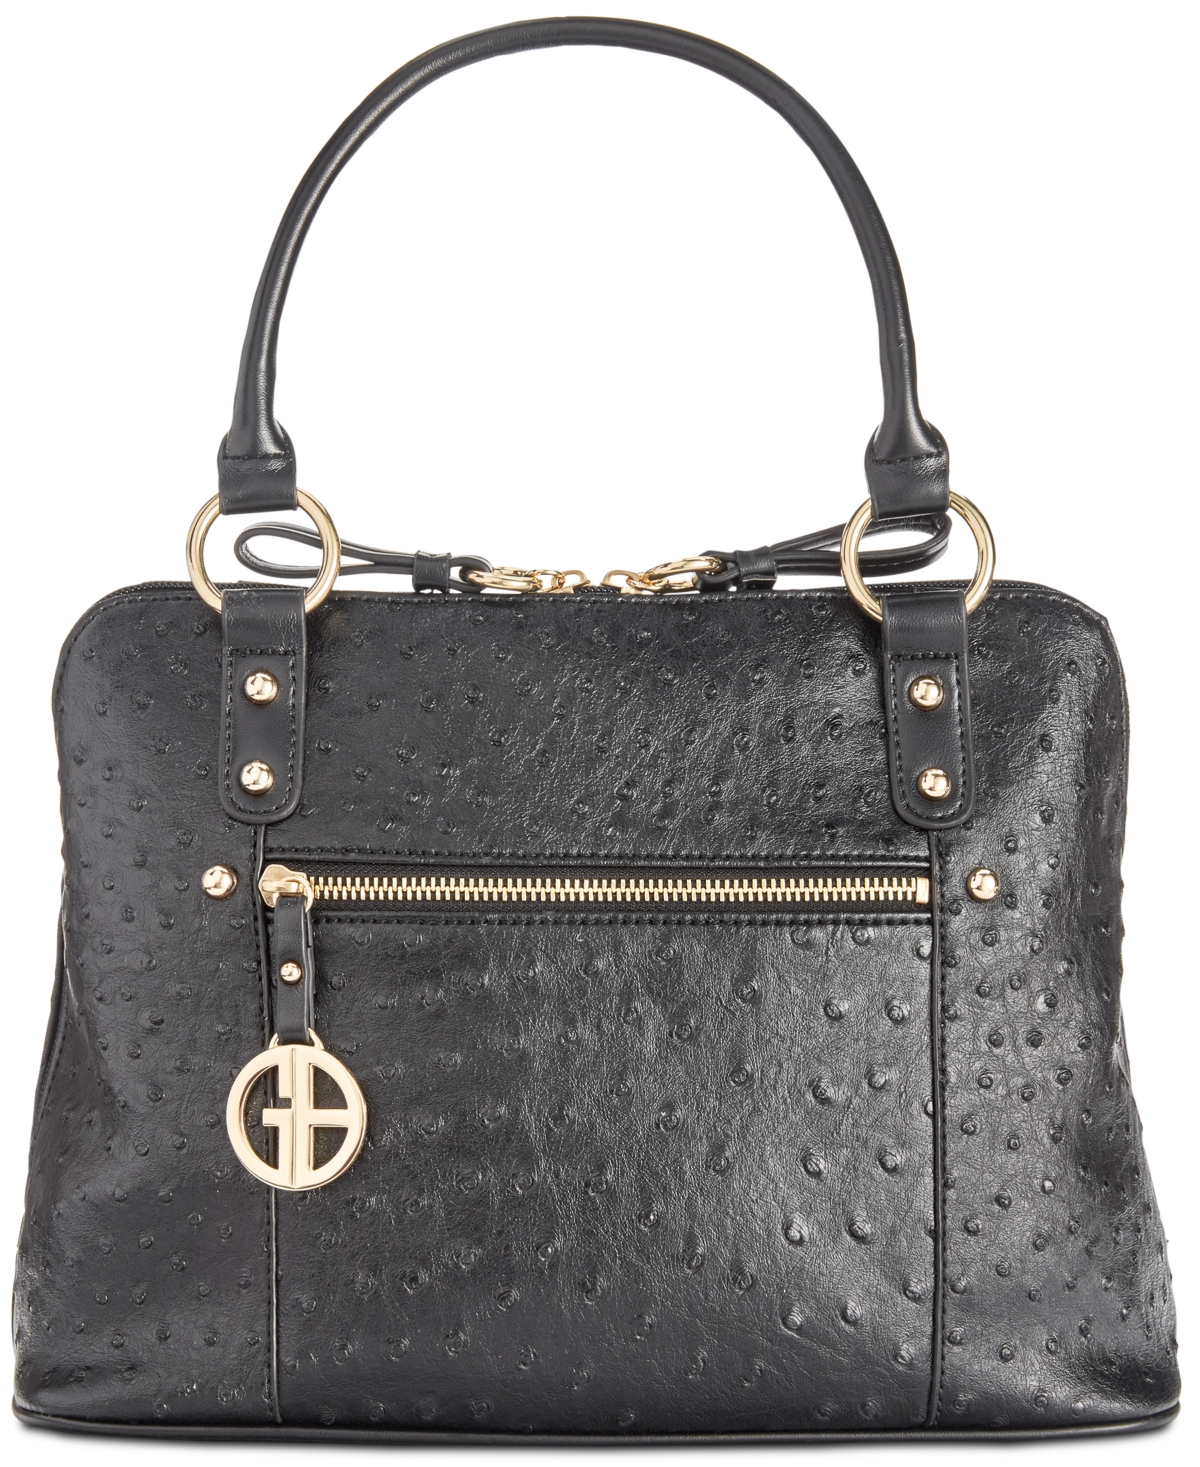 Ostrich-Embossed Dome Satchel, Created for Macy's - Black